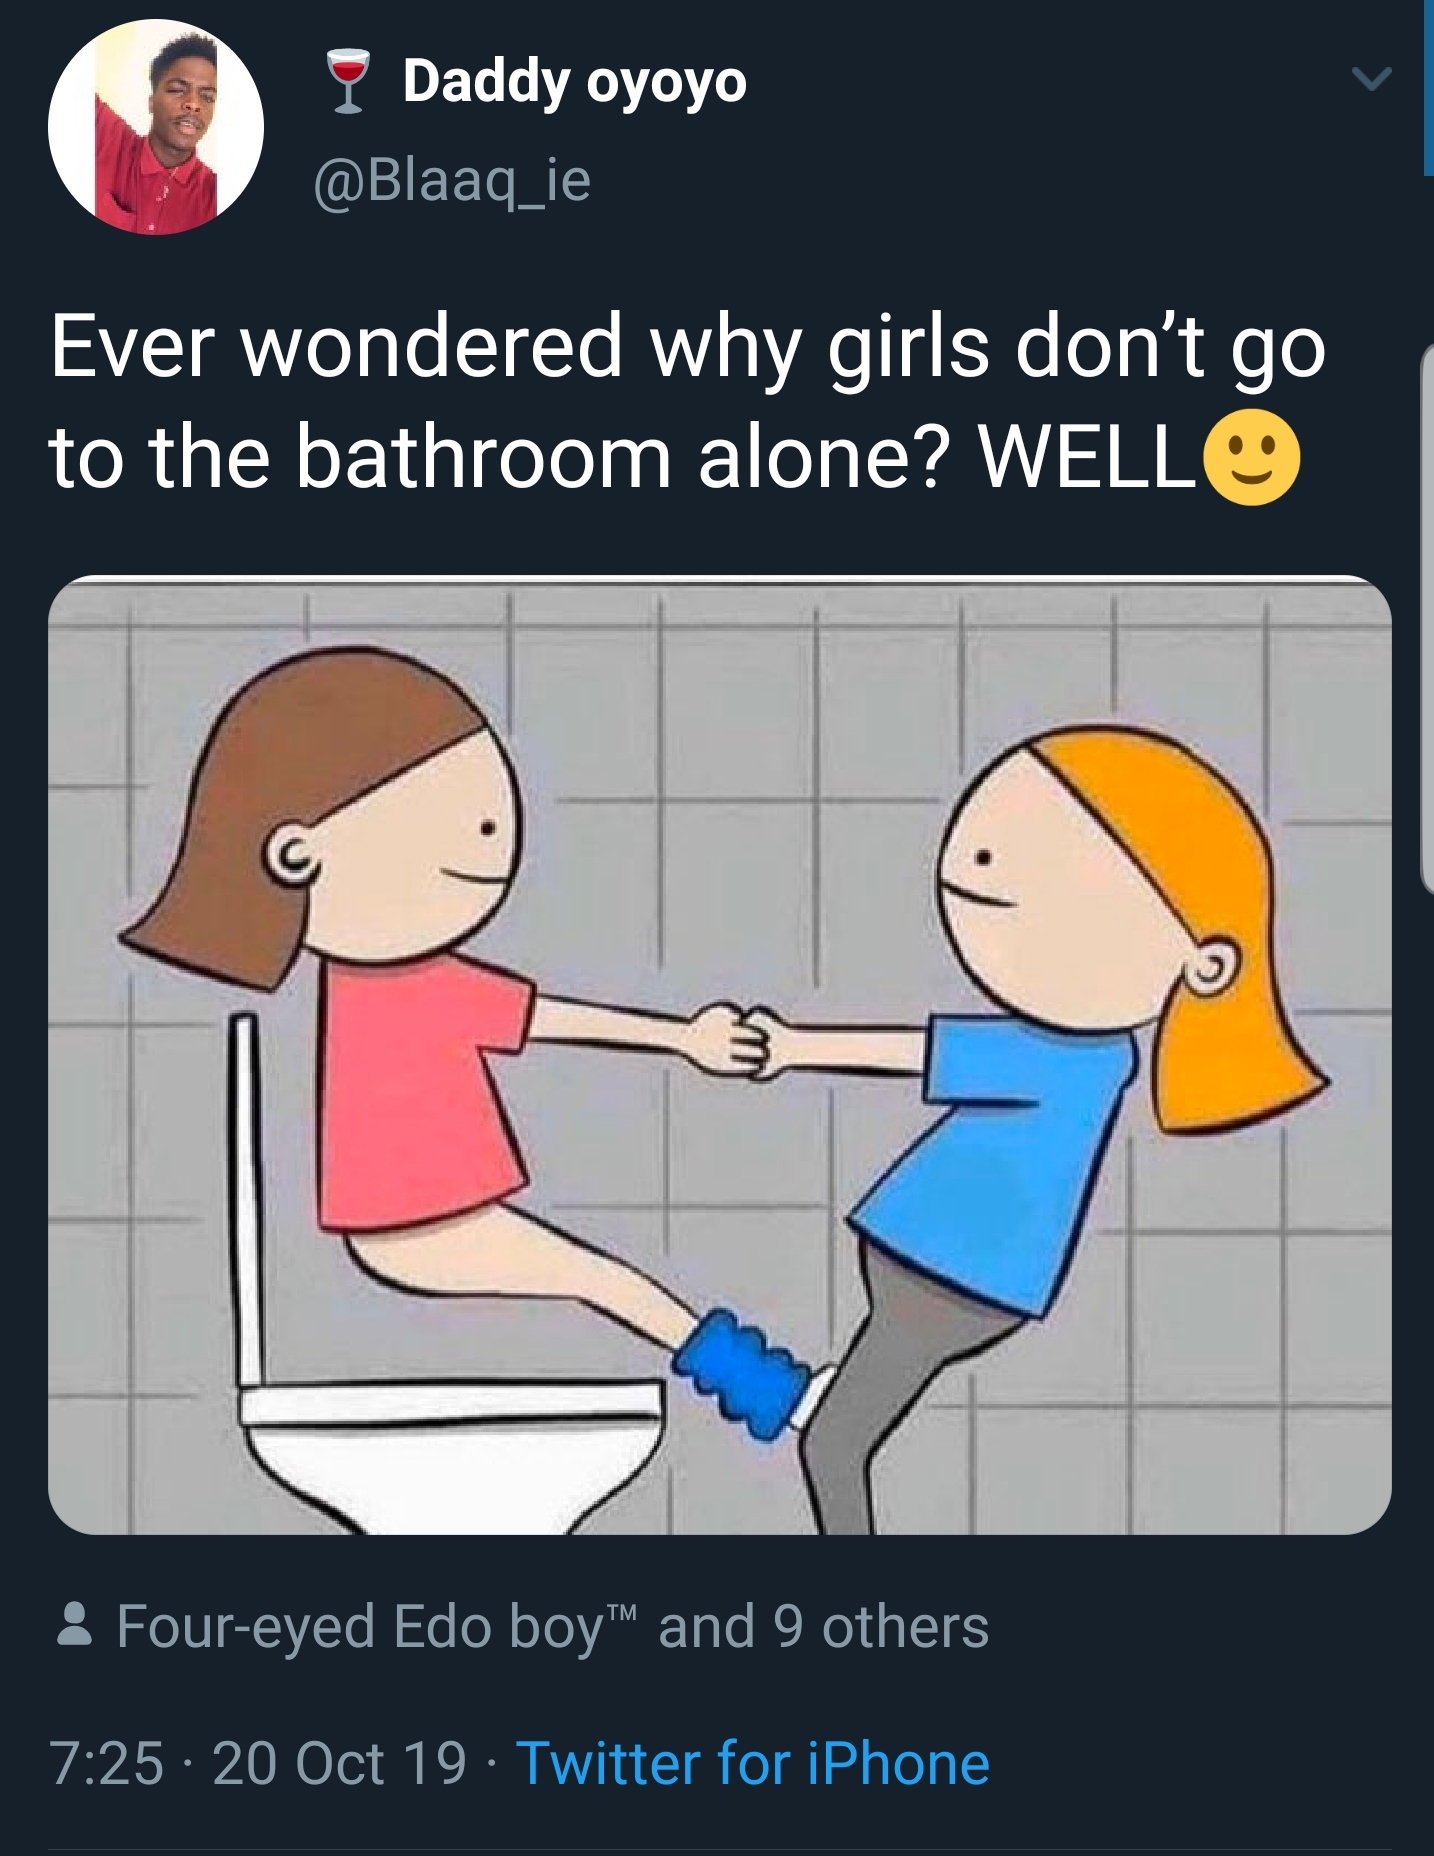 girls don t go to the bathroom alone meme - 7 Daddy oyoyo Ever wondered why girls don't go to the bathroom alone? Well Foureyed Edo boy" and 9 others .20 Oct 19 Twitter for iPhone